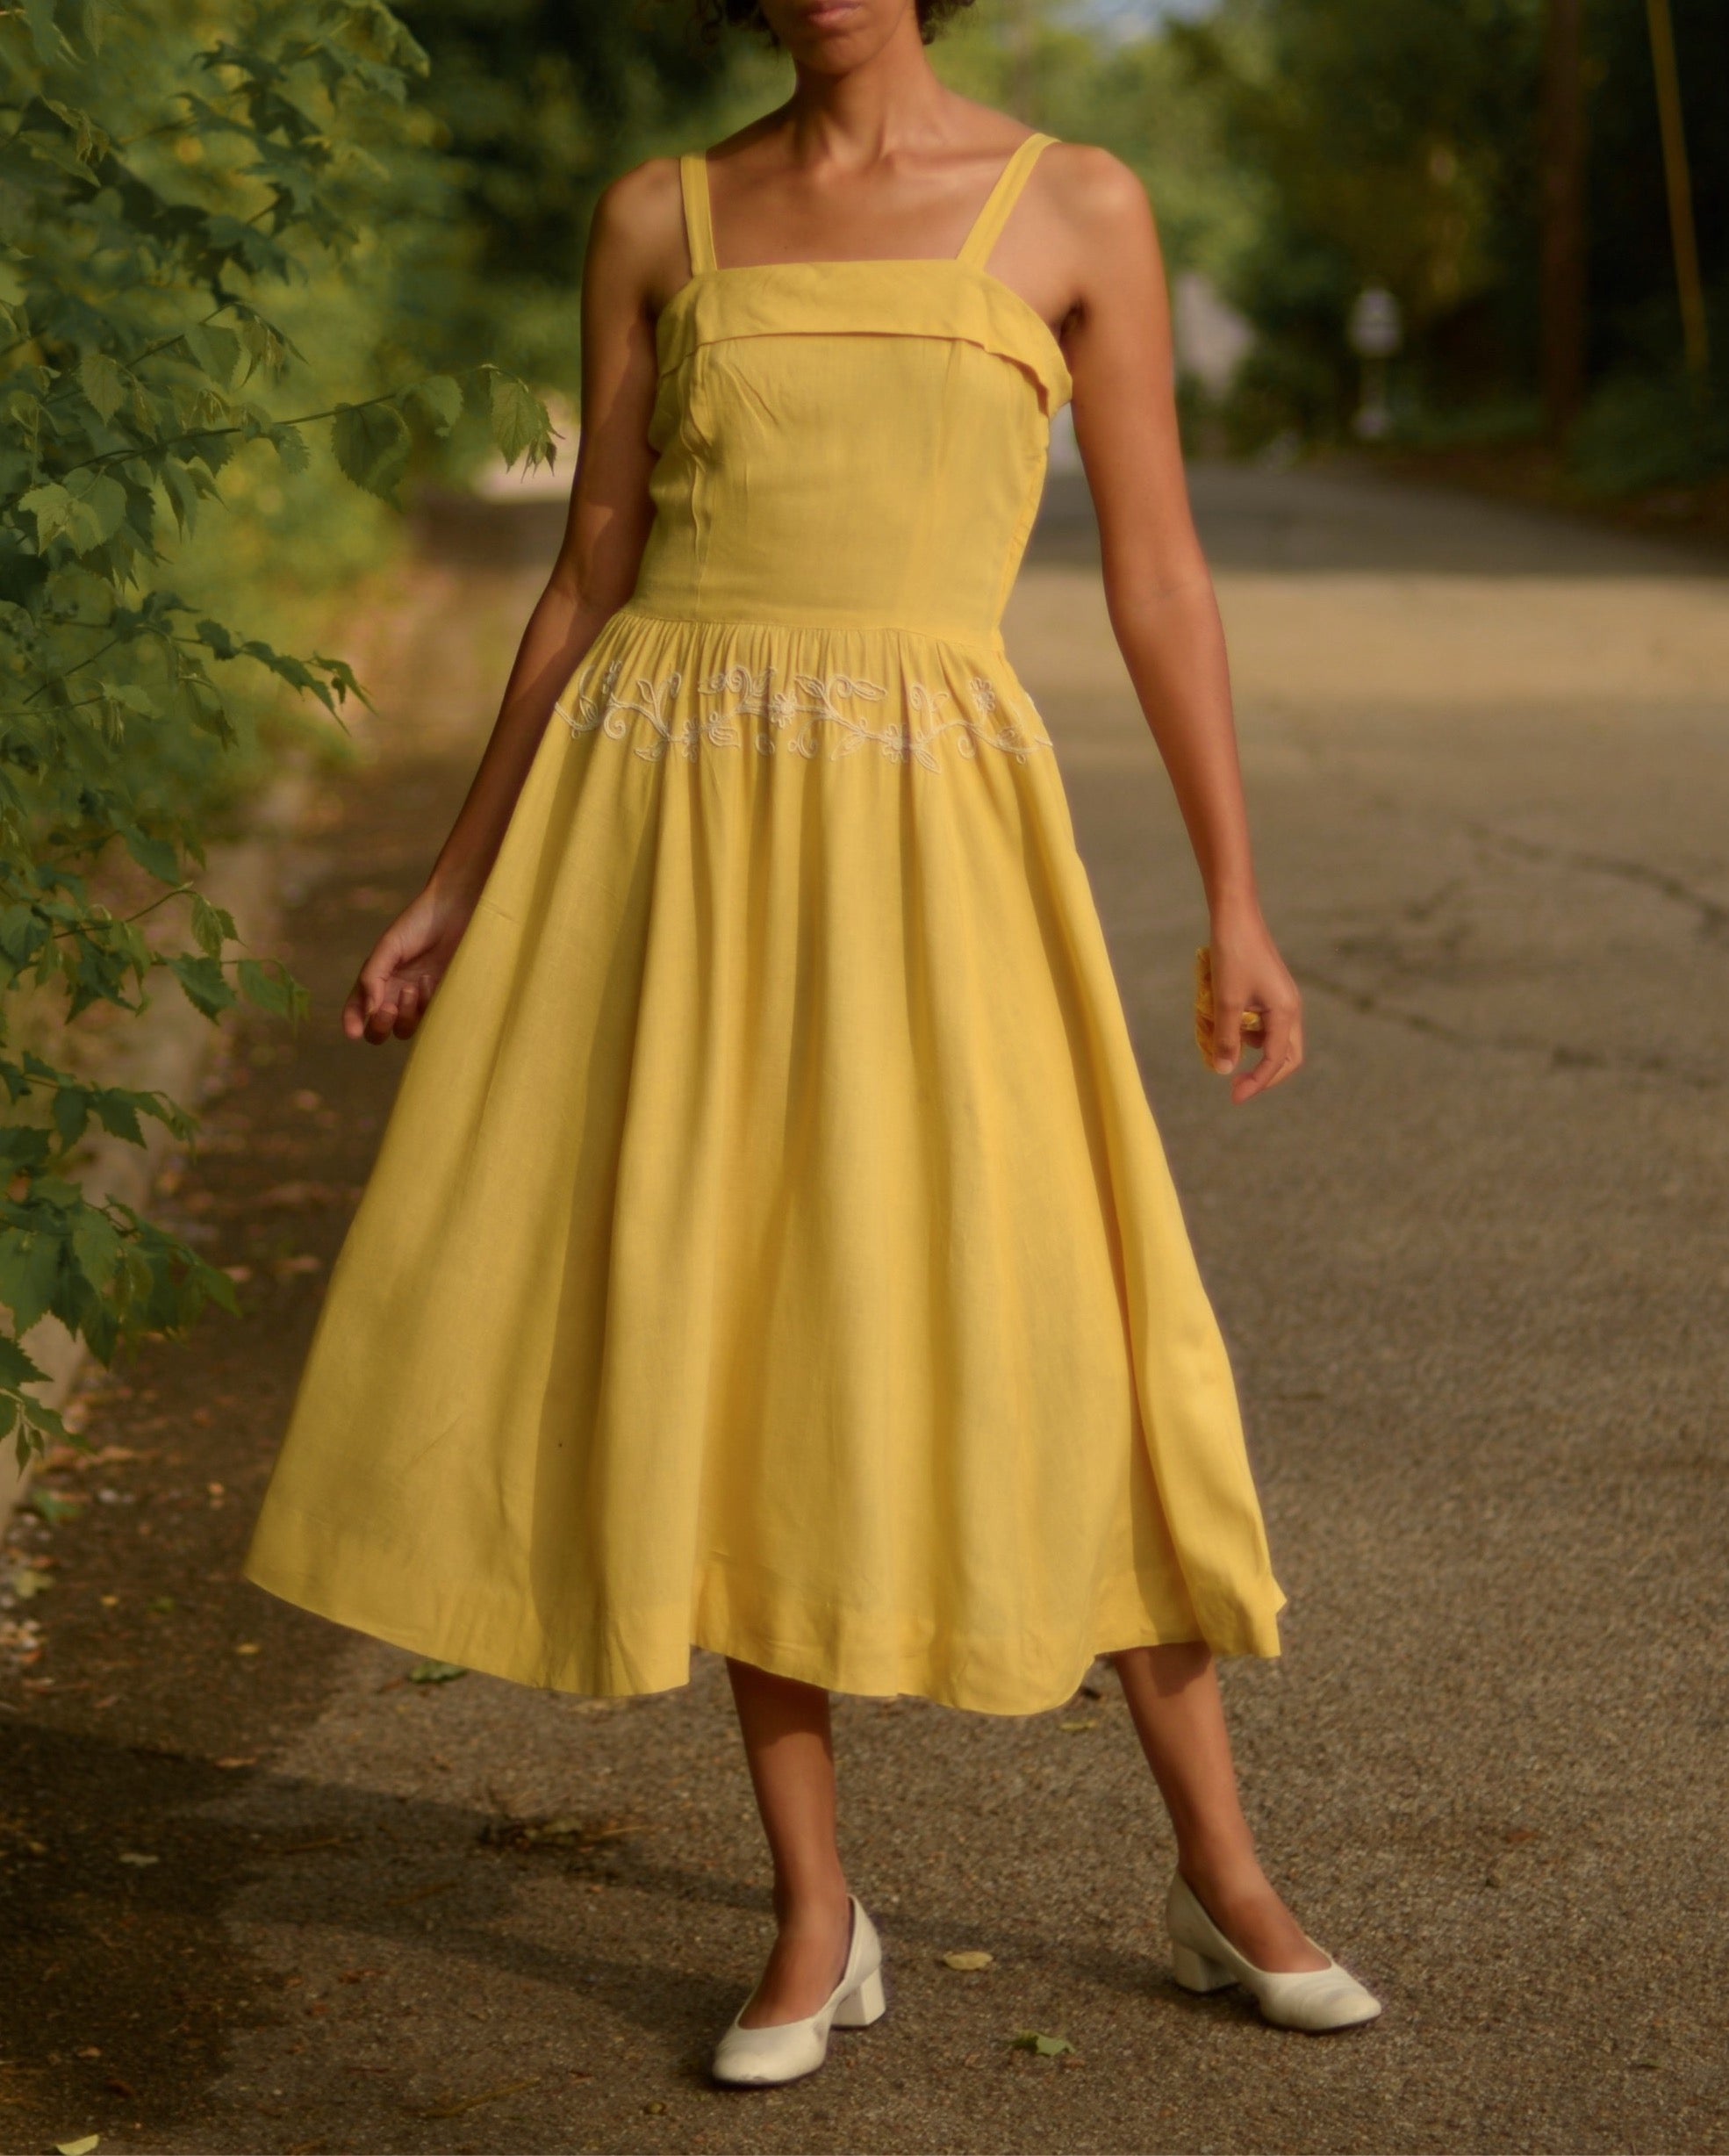 1940s yellow linen sun dress with embroidery detail, small-medium